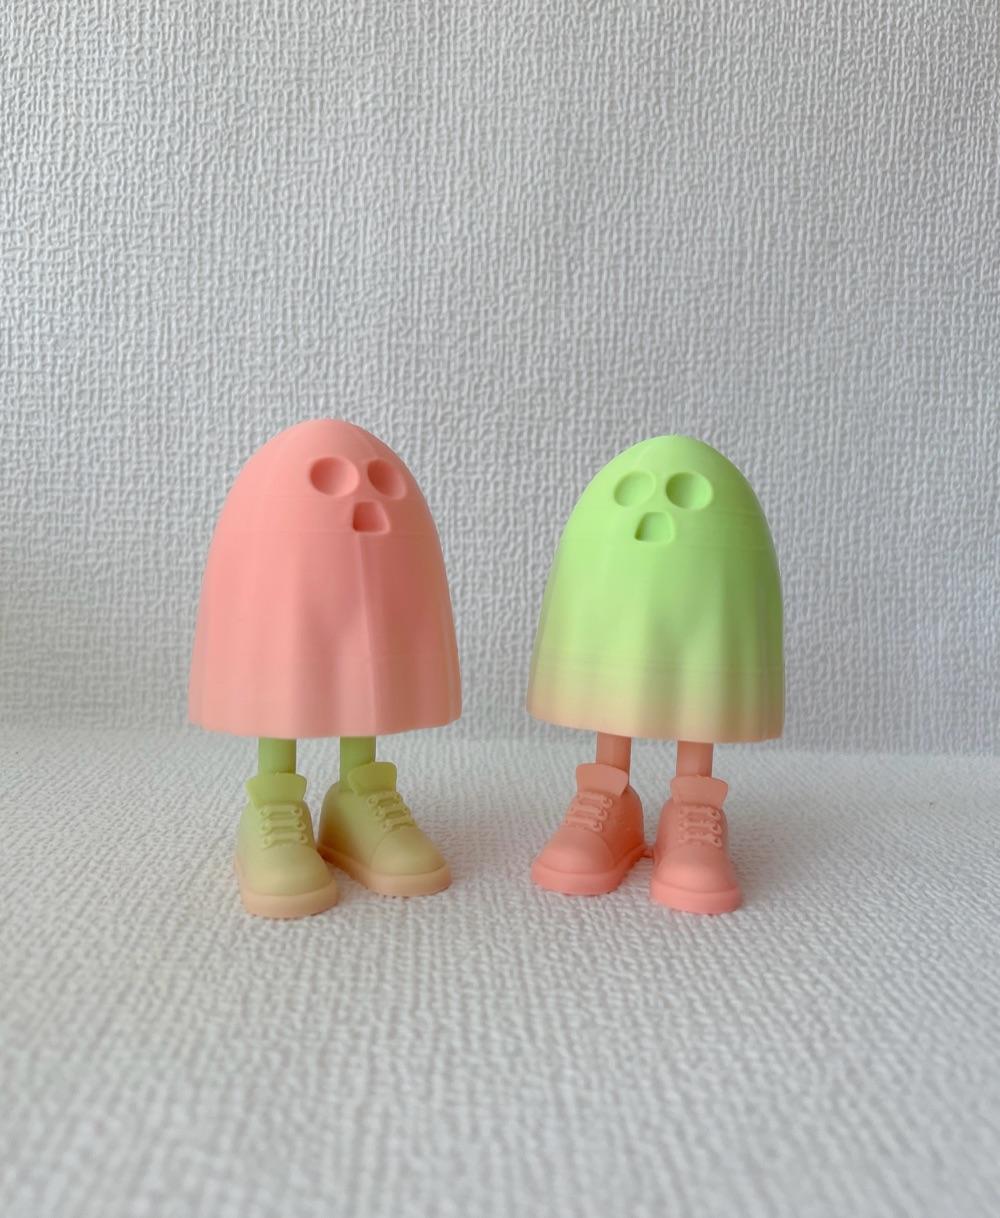 Sneakers The Halloween Ghost - Sibling ghosts!
Isanmate rainbow filament - 3d model